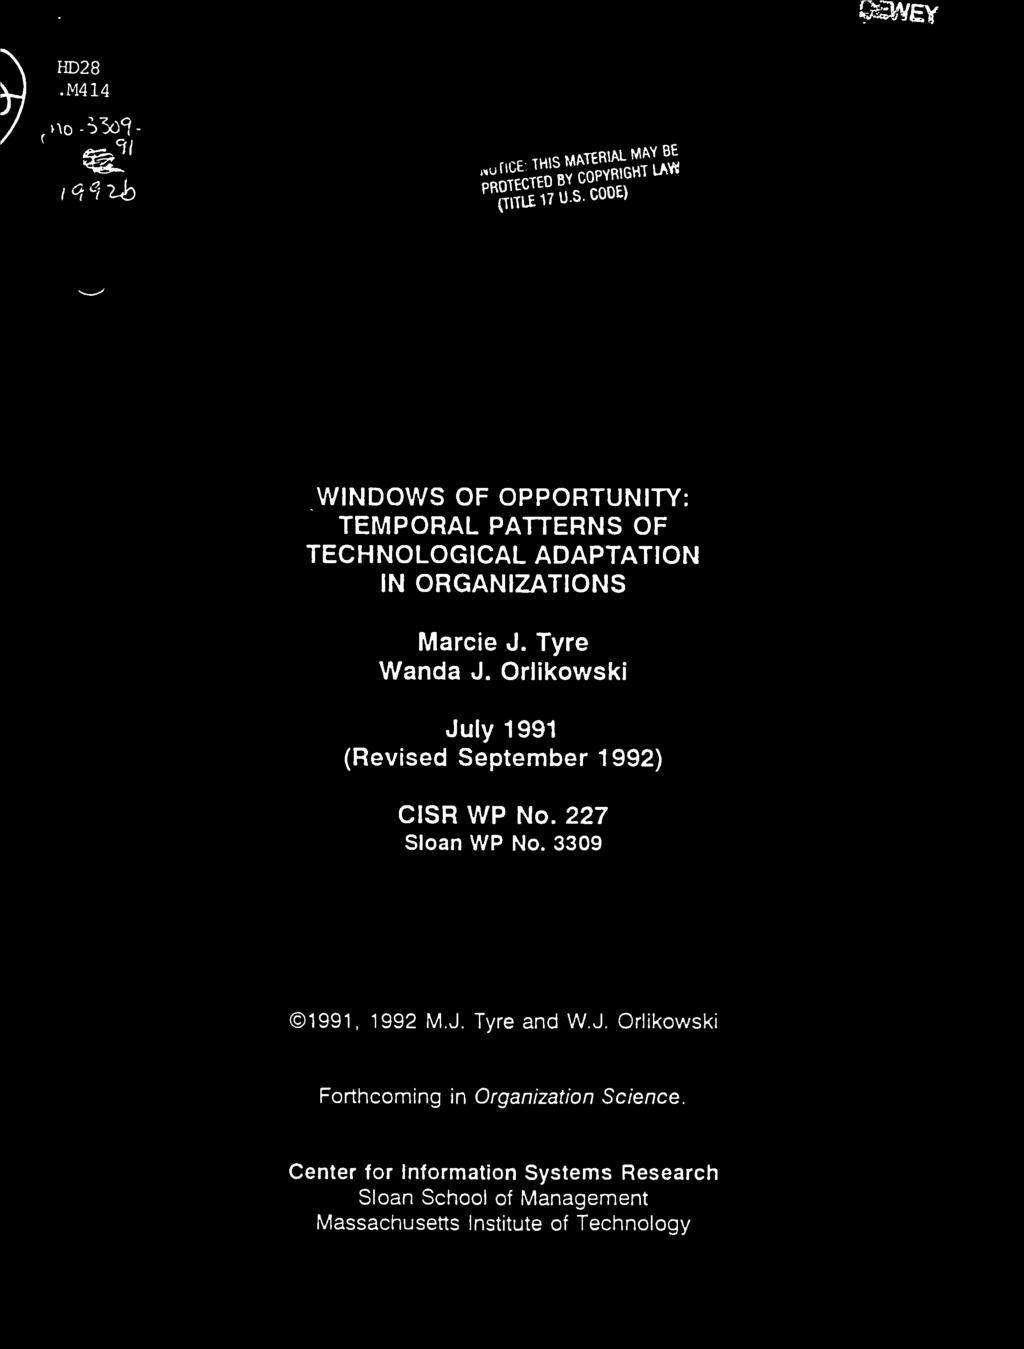 uV7U.S.C00 ) WINDOWS OF OPPORTUNITY: TEMPORAL PATTERNS OF TECHNOLOGICAL ADAPTATION IN ORGANIZATIONS Marcie J.